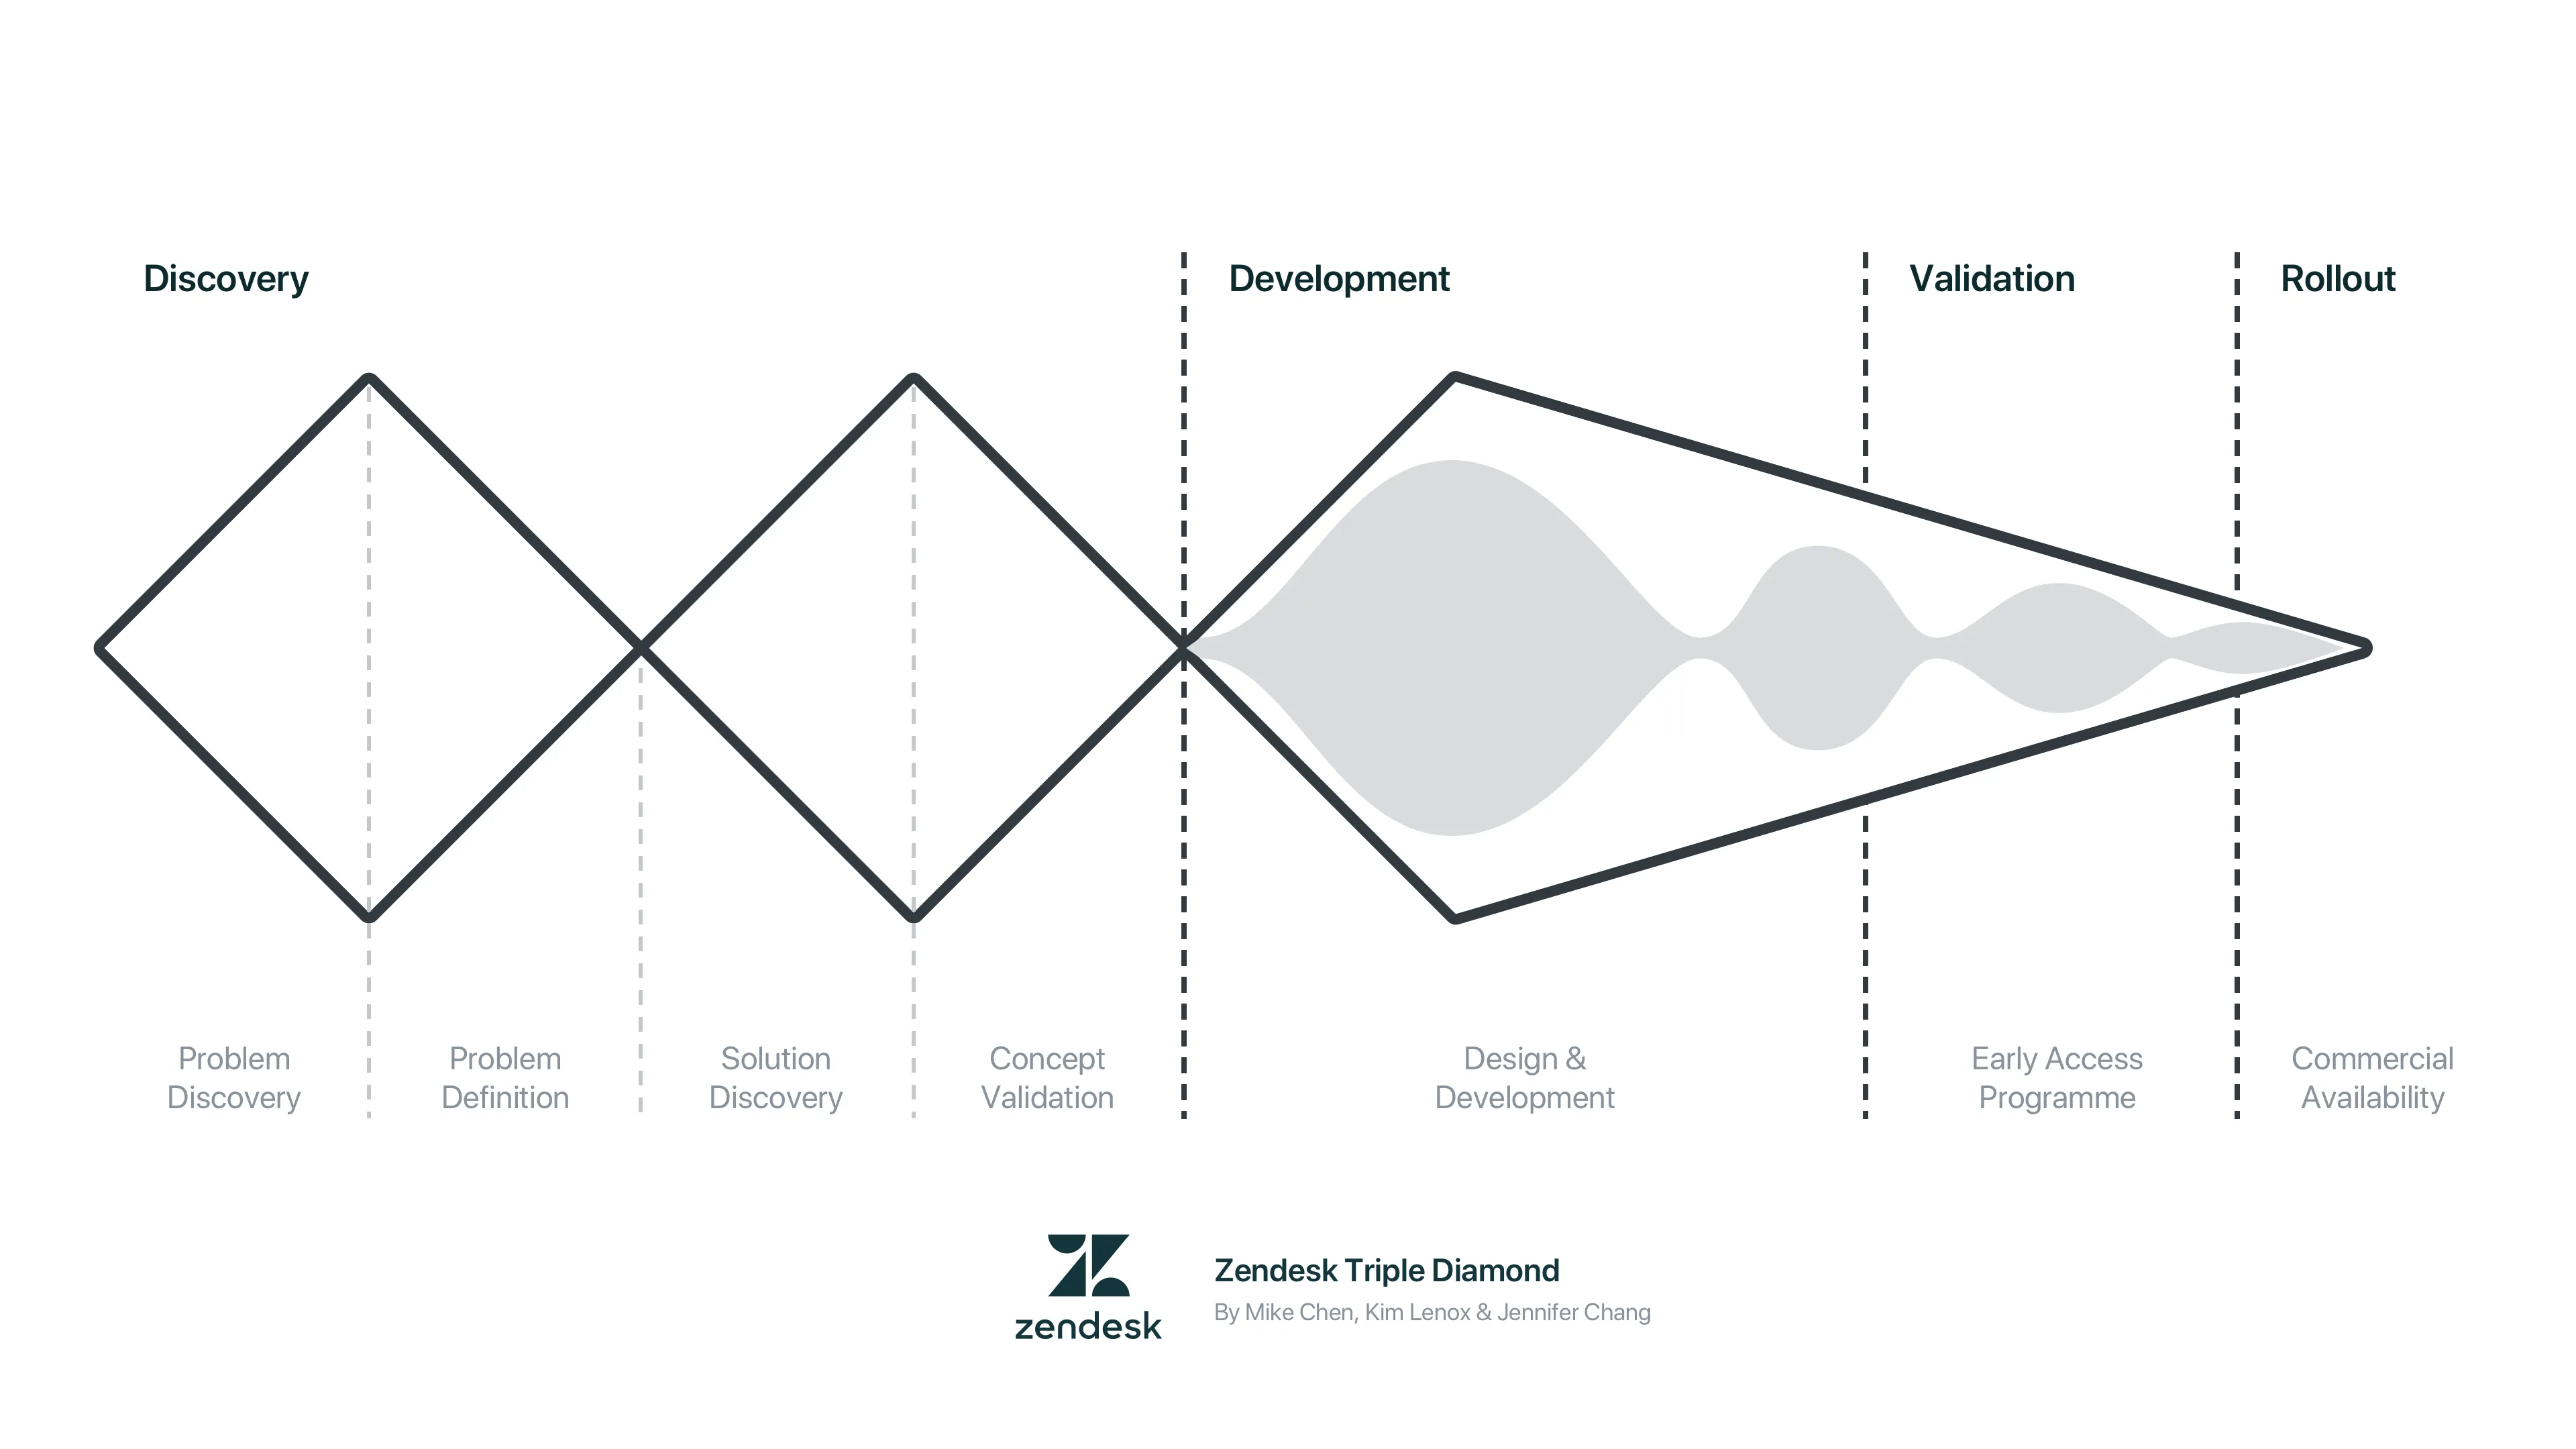 This is an image visualizing Zendesk's Triple Diamond Approach to Product Design